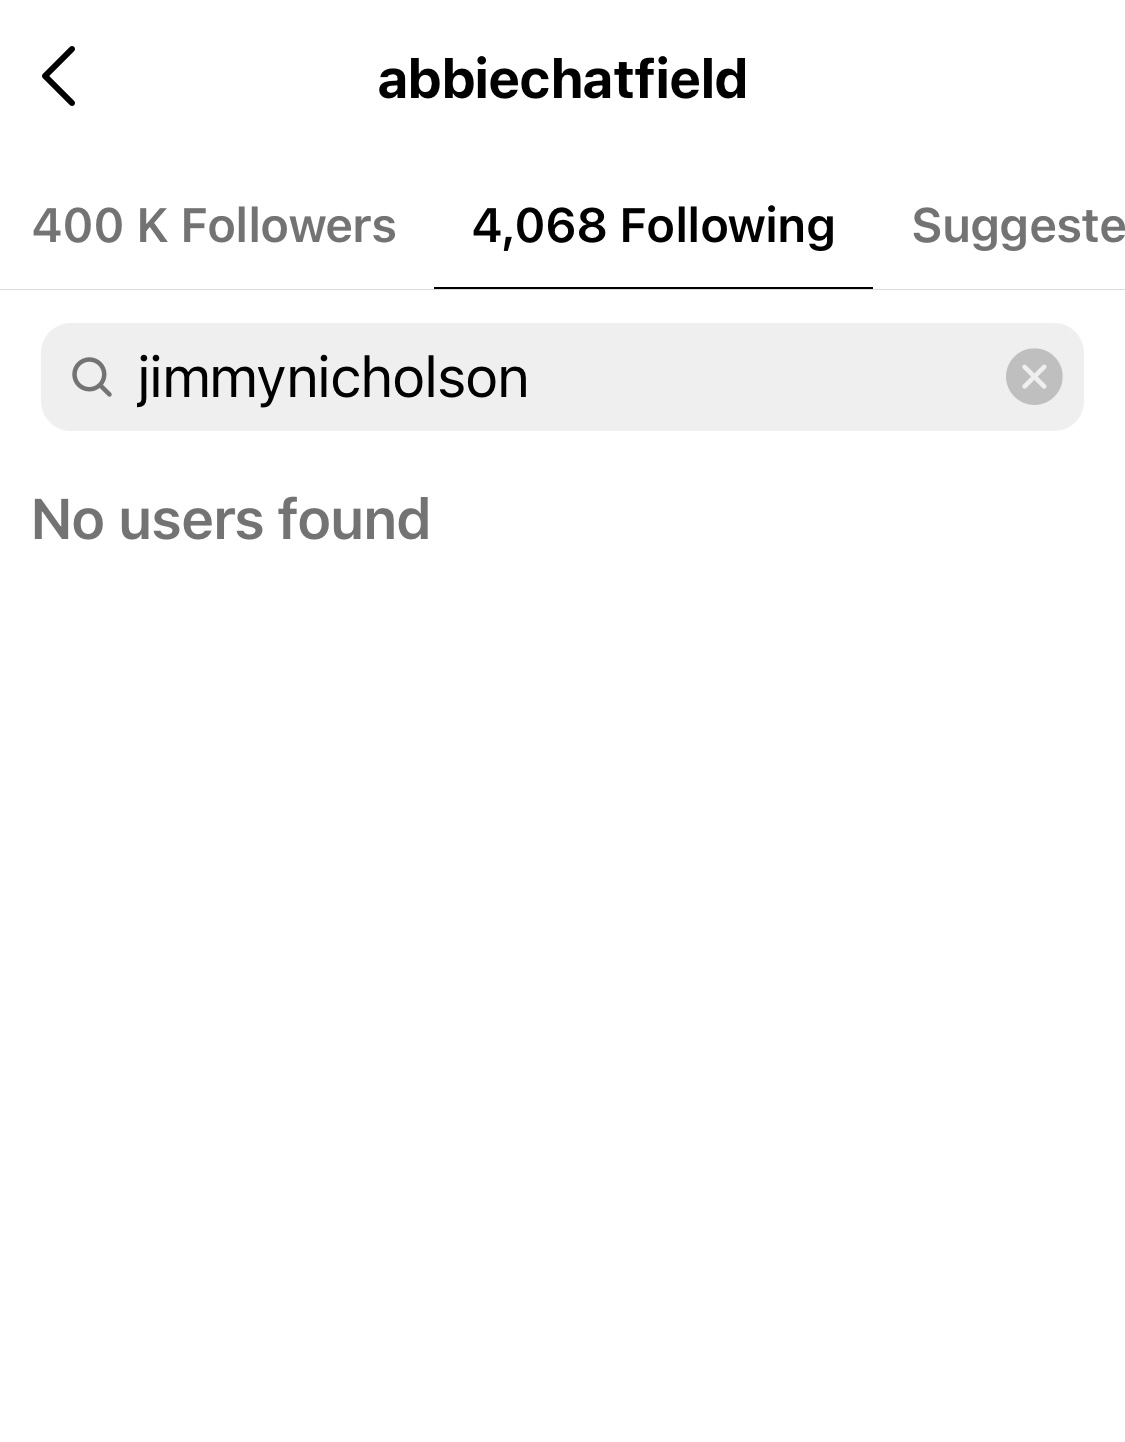 abbie unfollow jimmy holly onlyfans